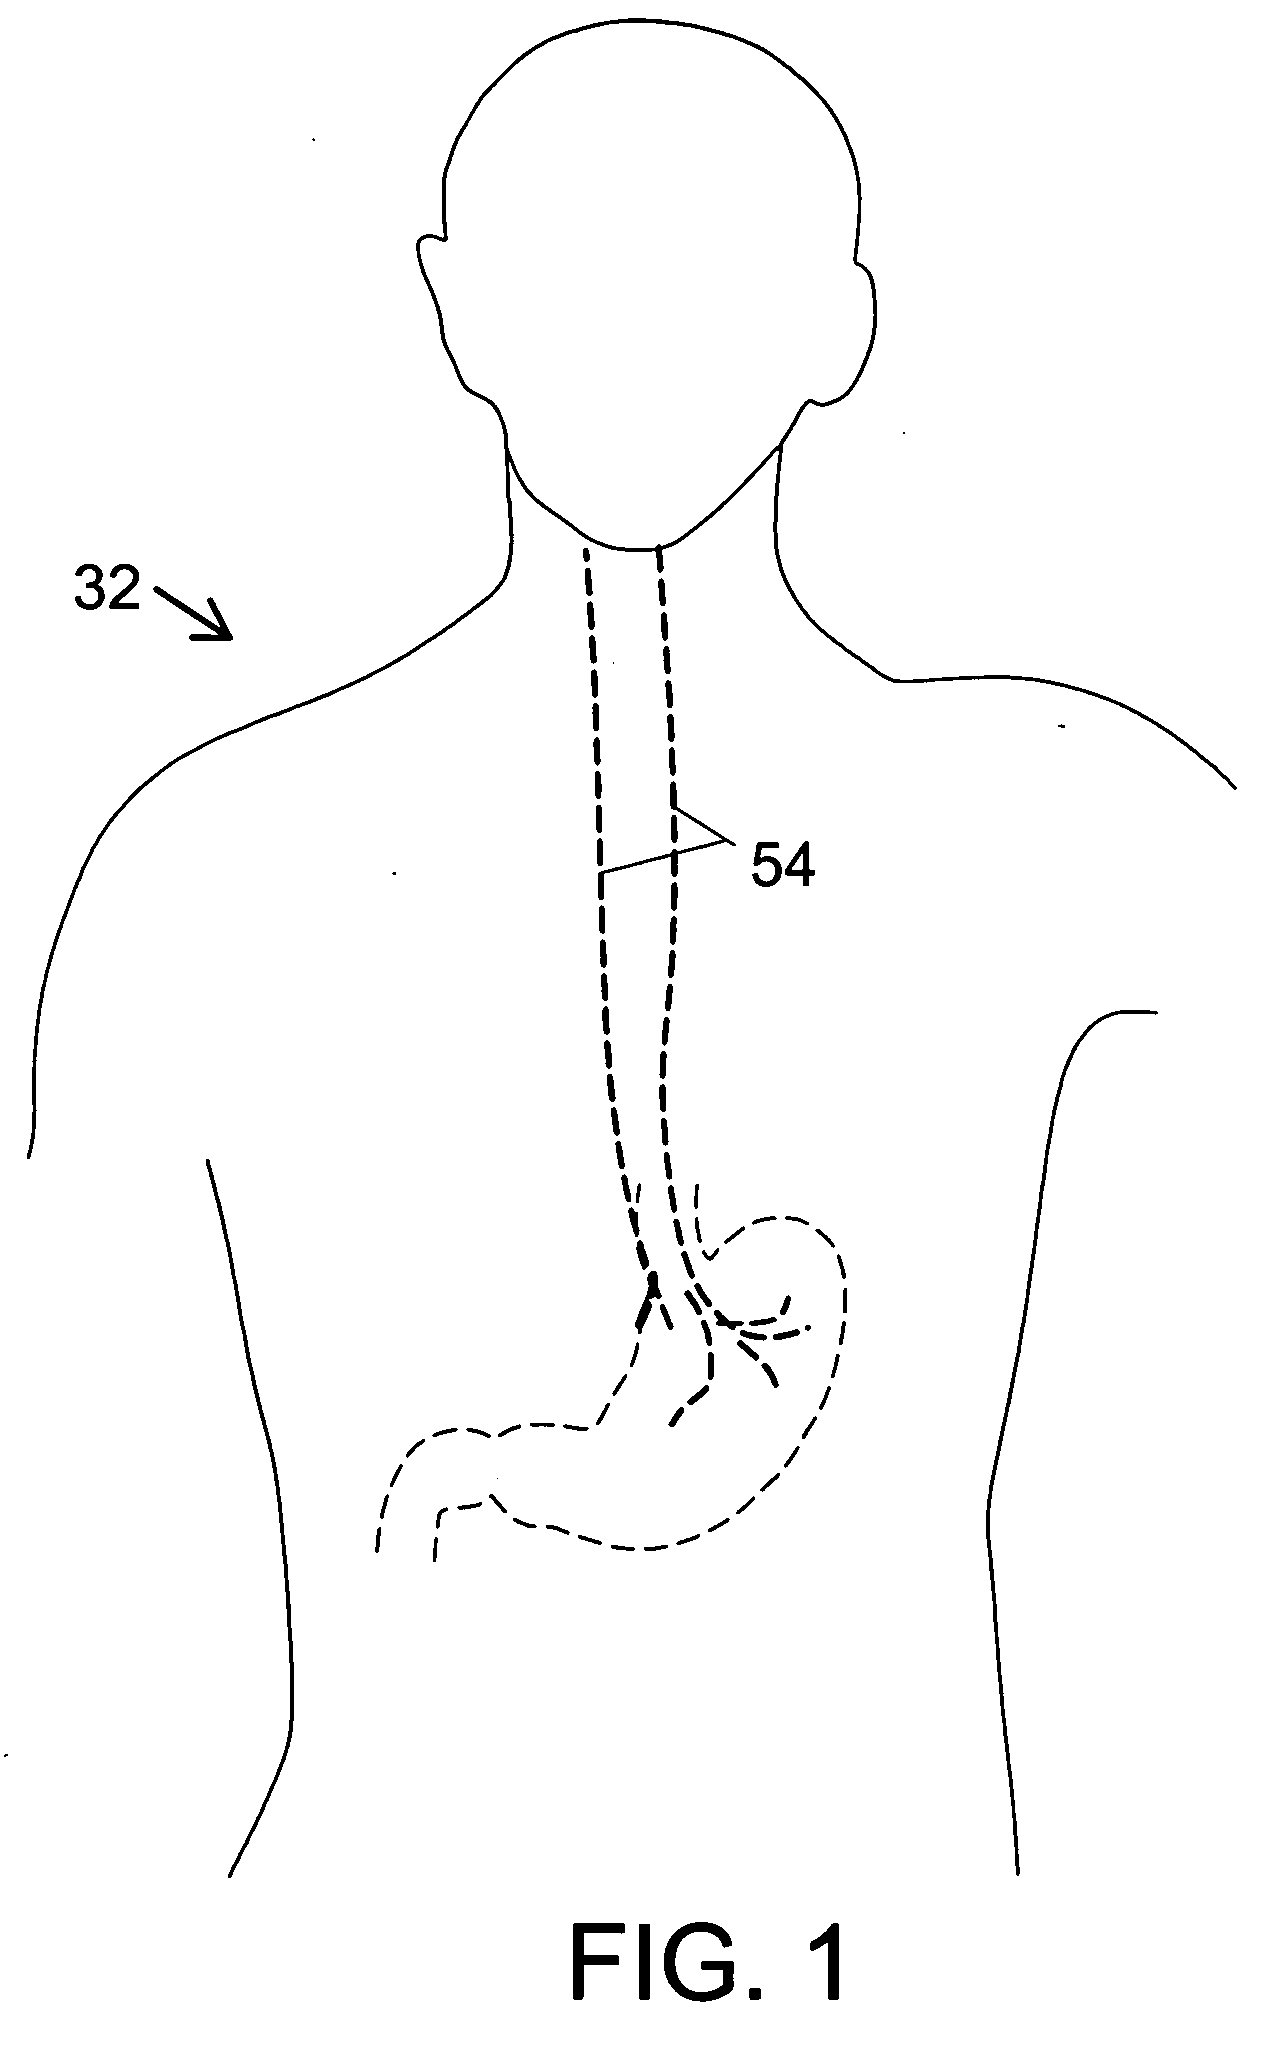 Method and system for vagal blocking and/or vagal stimulation to provide therapy for obesity and other gastrointestinal disorders